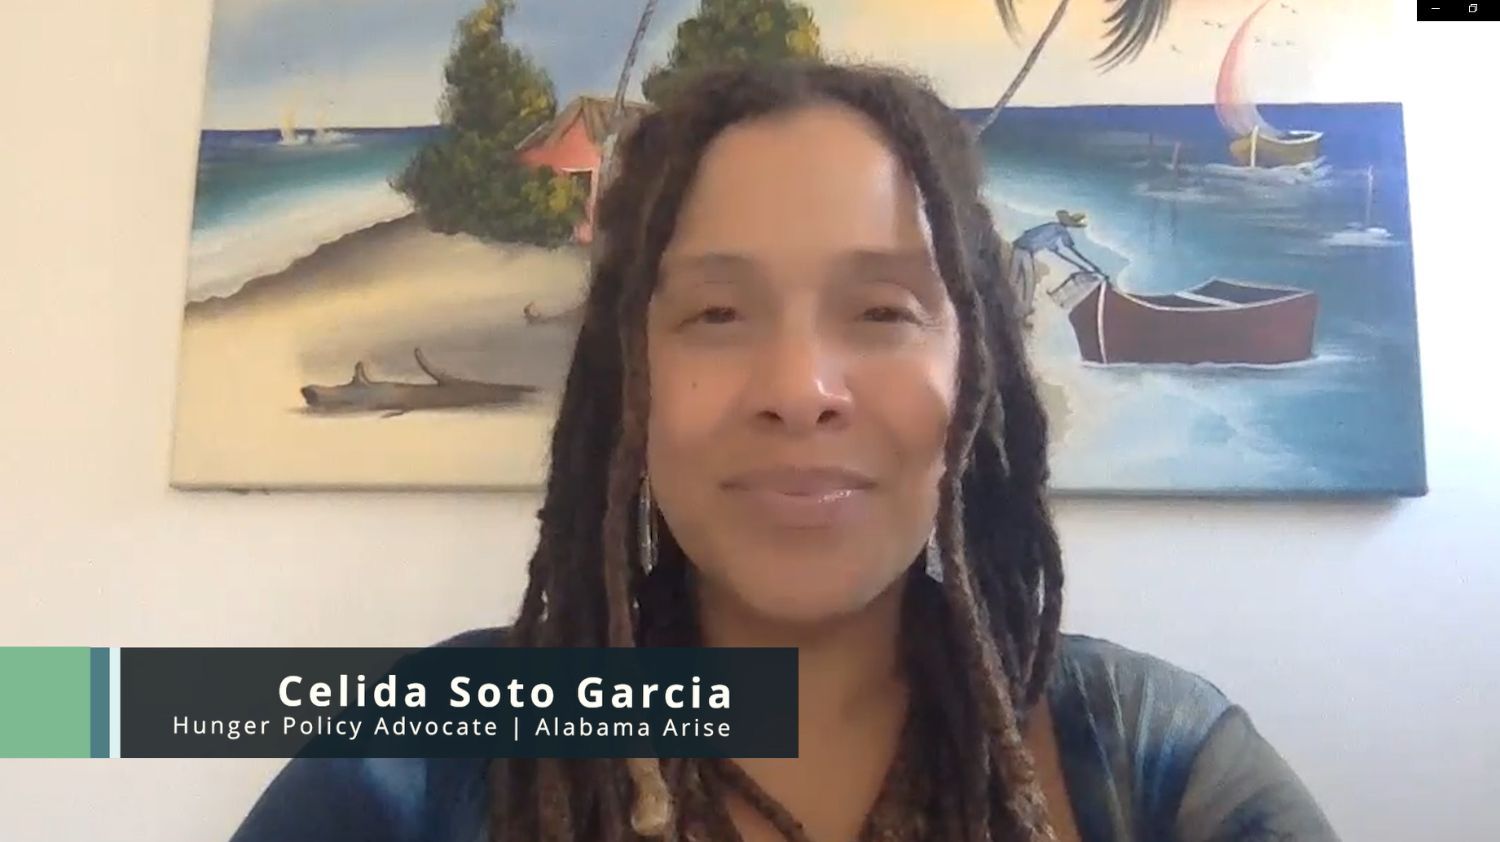 A black woman with brown dreadlocks speaks to the camera